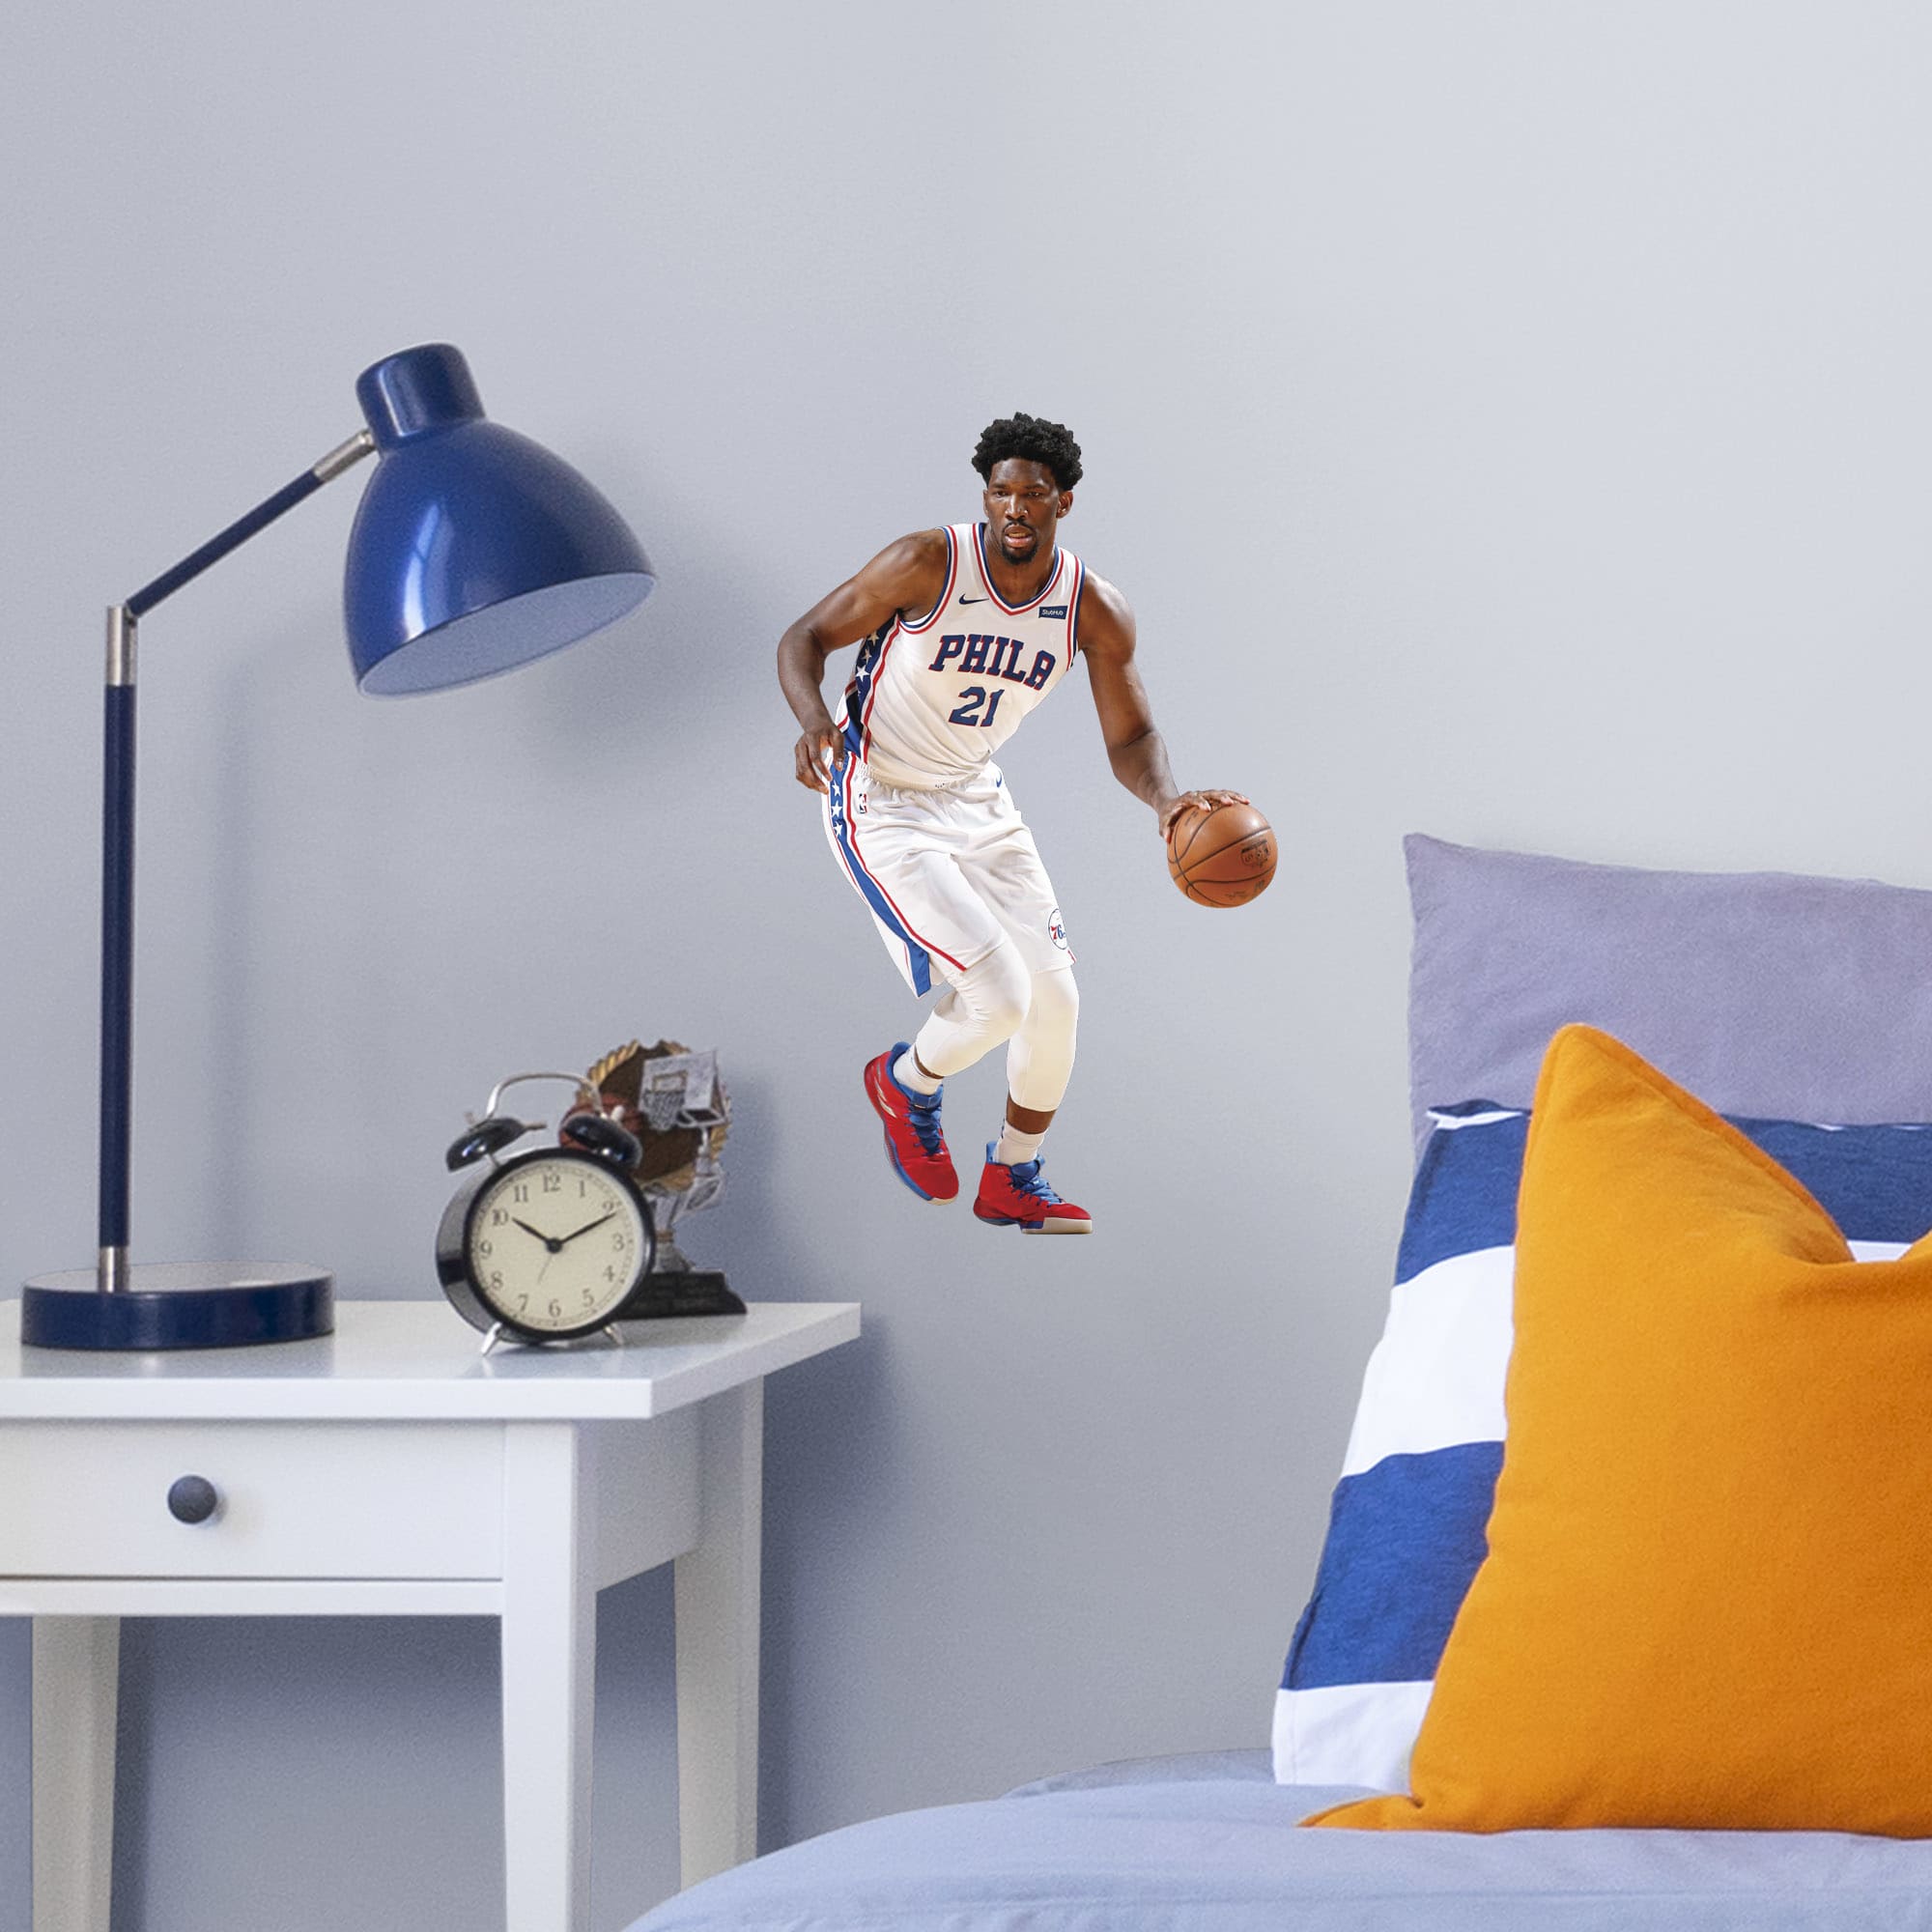 Joel Embiid for Philadelphia 76ers - Officially Licensed NBA Removable Wall Decal Large by Fathead | Vinyl